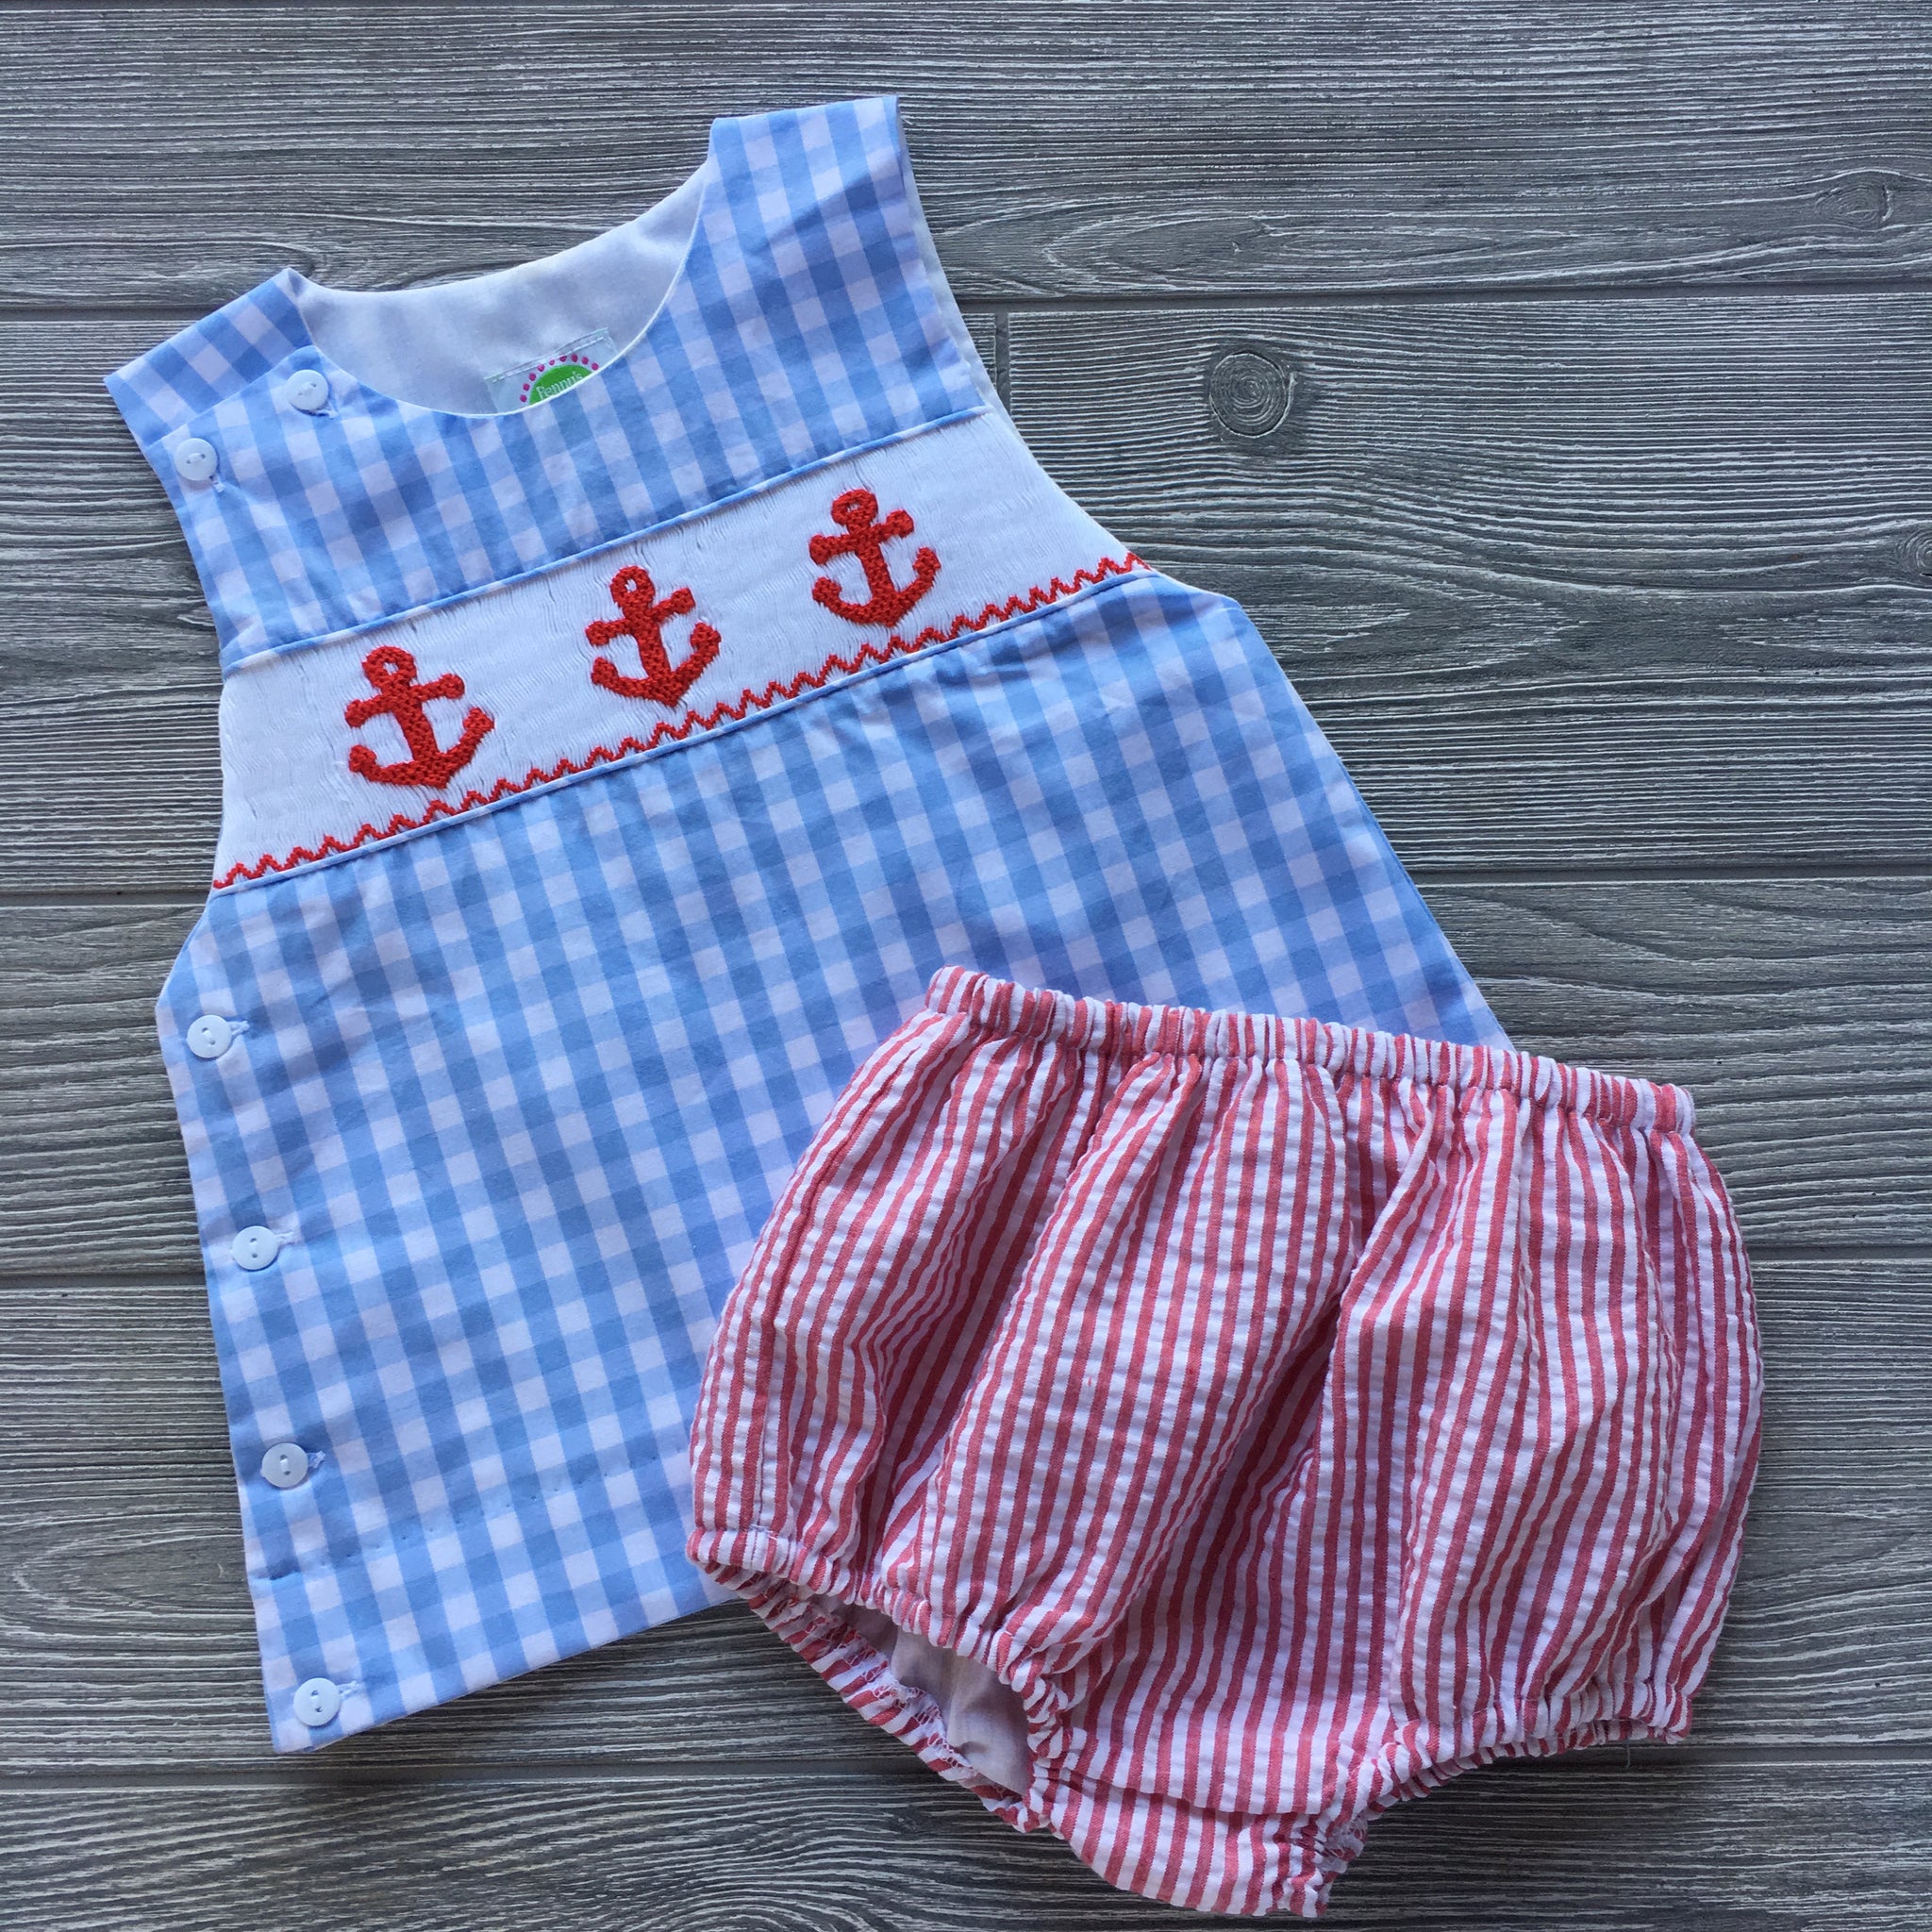 Anchors Aweigh Smocked Diaper Set